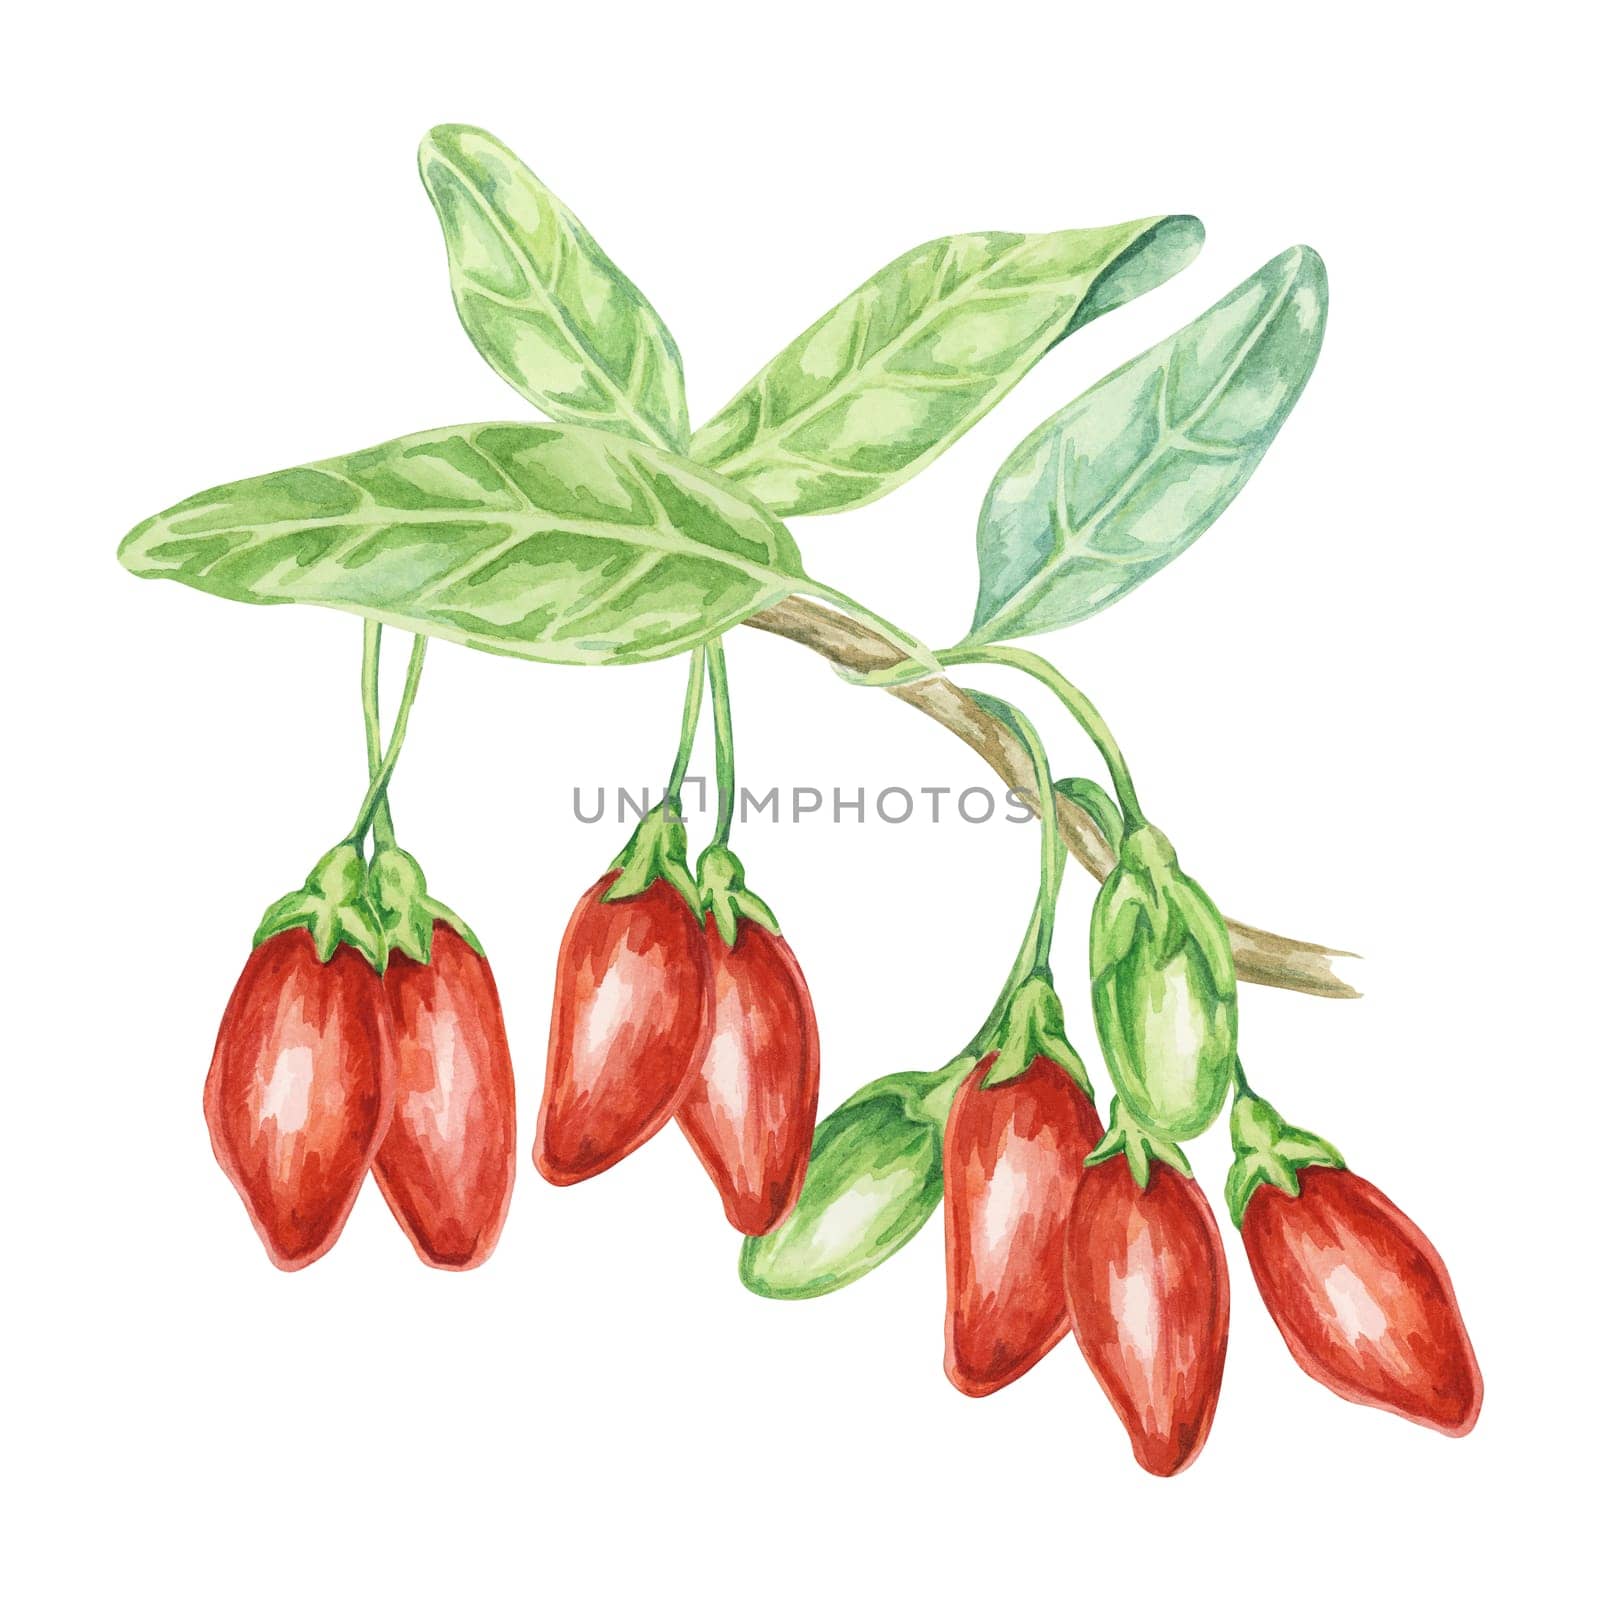 Red and Green Goji berries on the branch with leaves in watercolor isolated on white background. Hand-drawn clipart of licium barbarum fruits, leaves. Design for printing, packaging, cards, posters